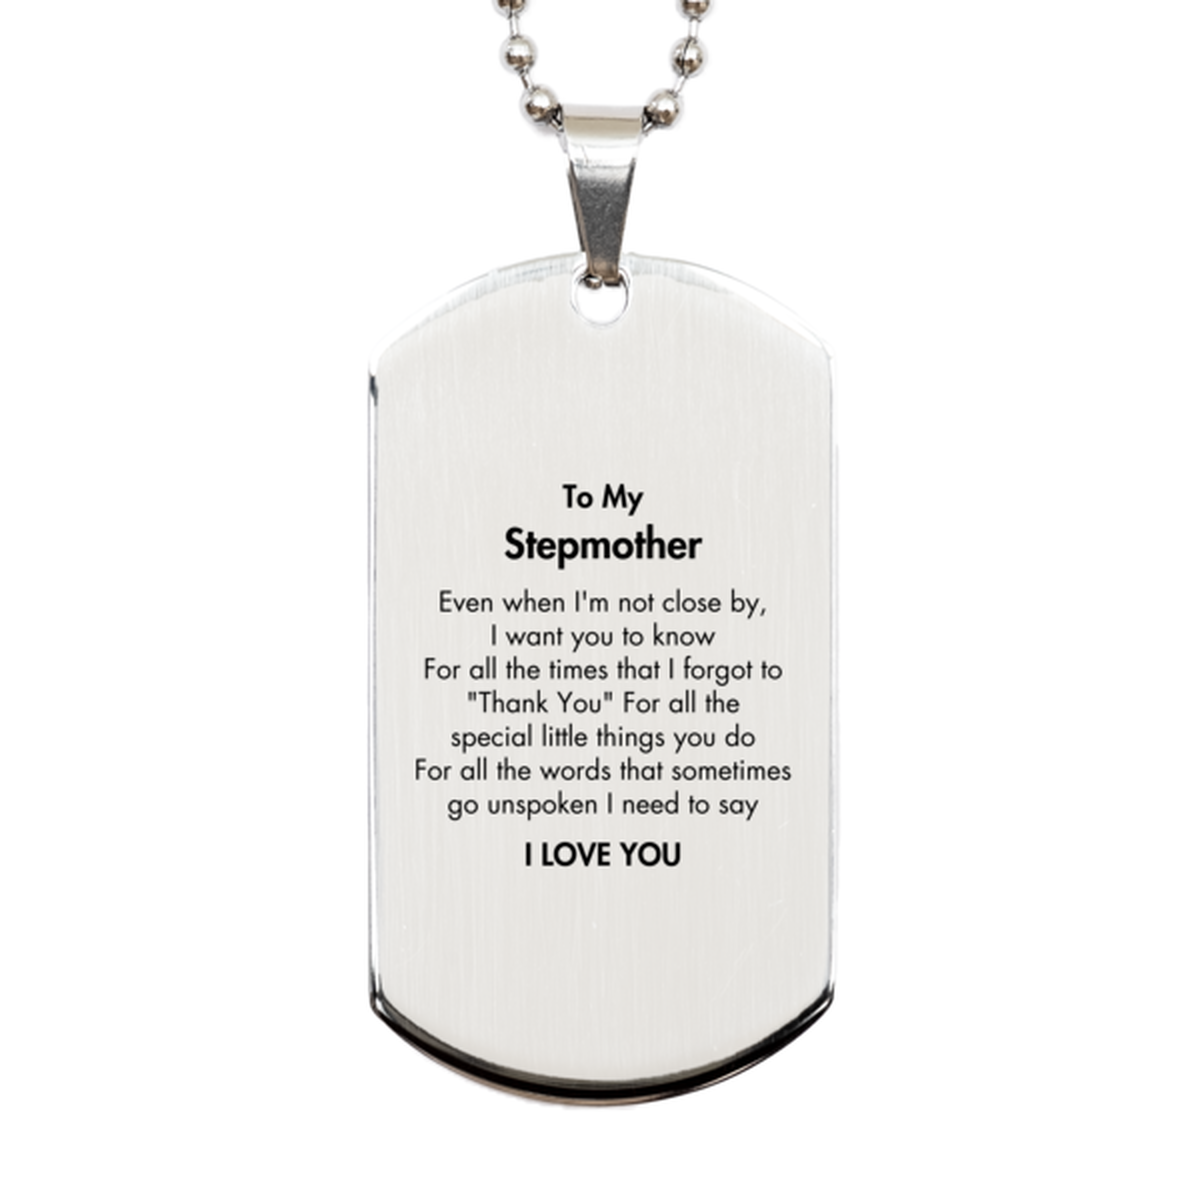 Thank You Gifts for Stepmother, Keepsake Silver Dog Tag Gifts for Stepmother Birthday Mother's day Father's Day Stepmother For all the words That sometimes go unspoken I need to say I LOVE YOU